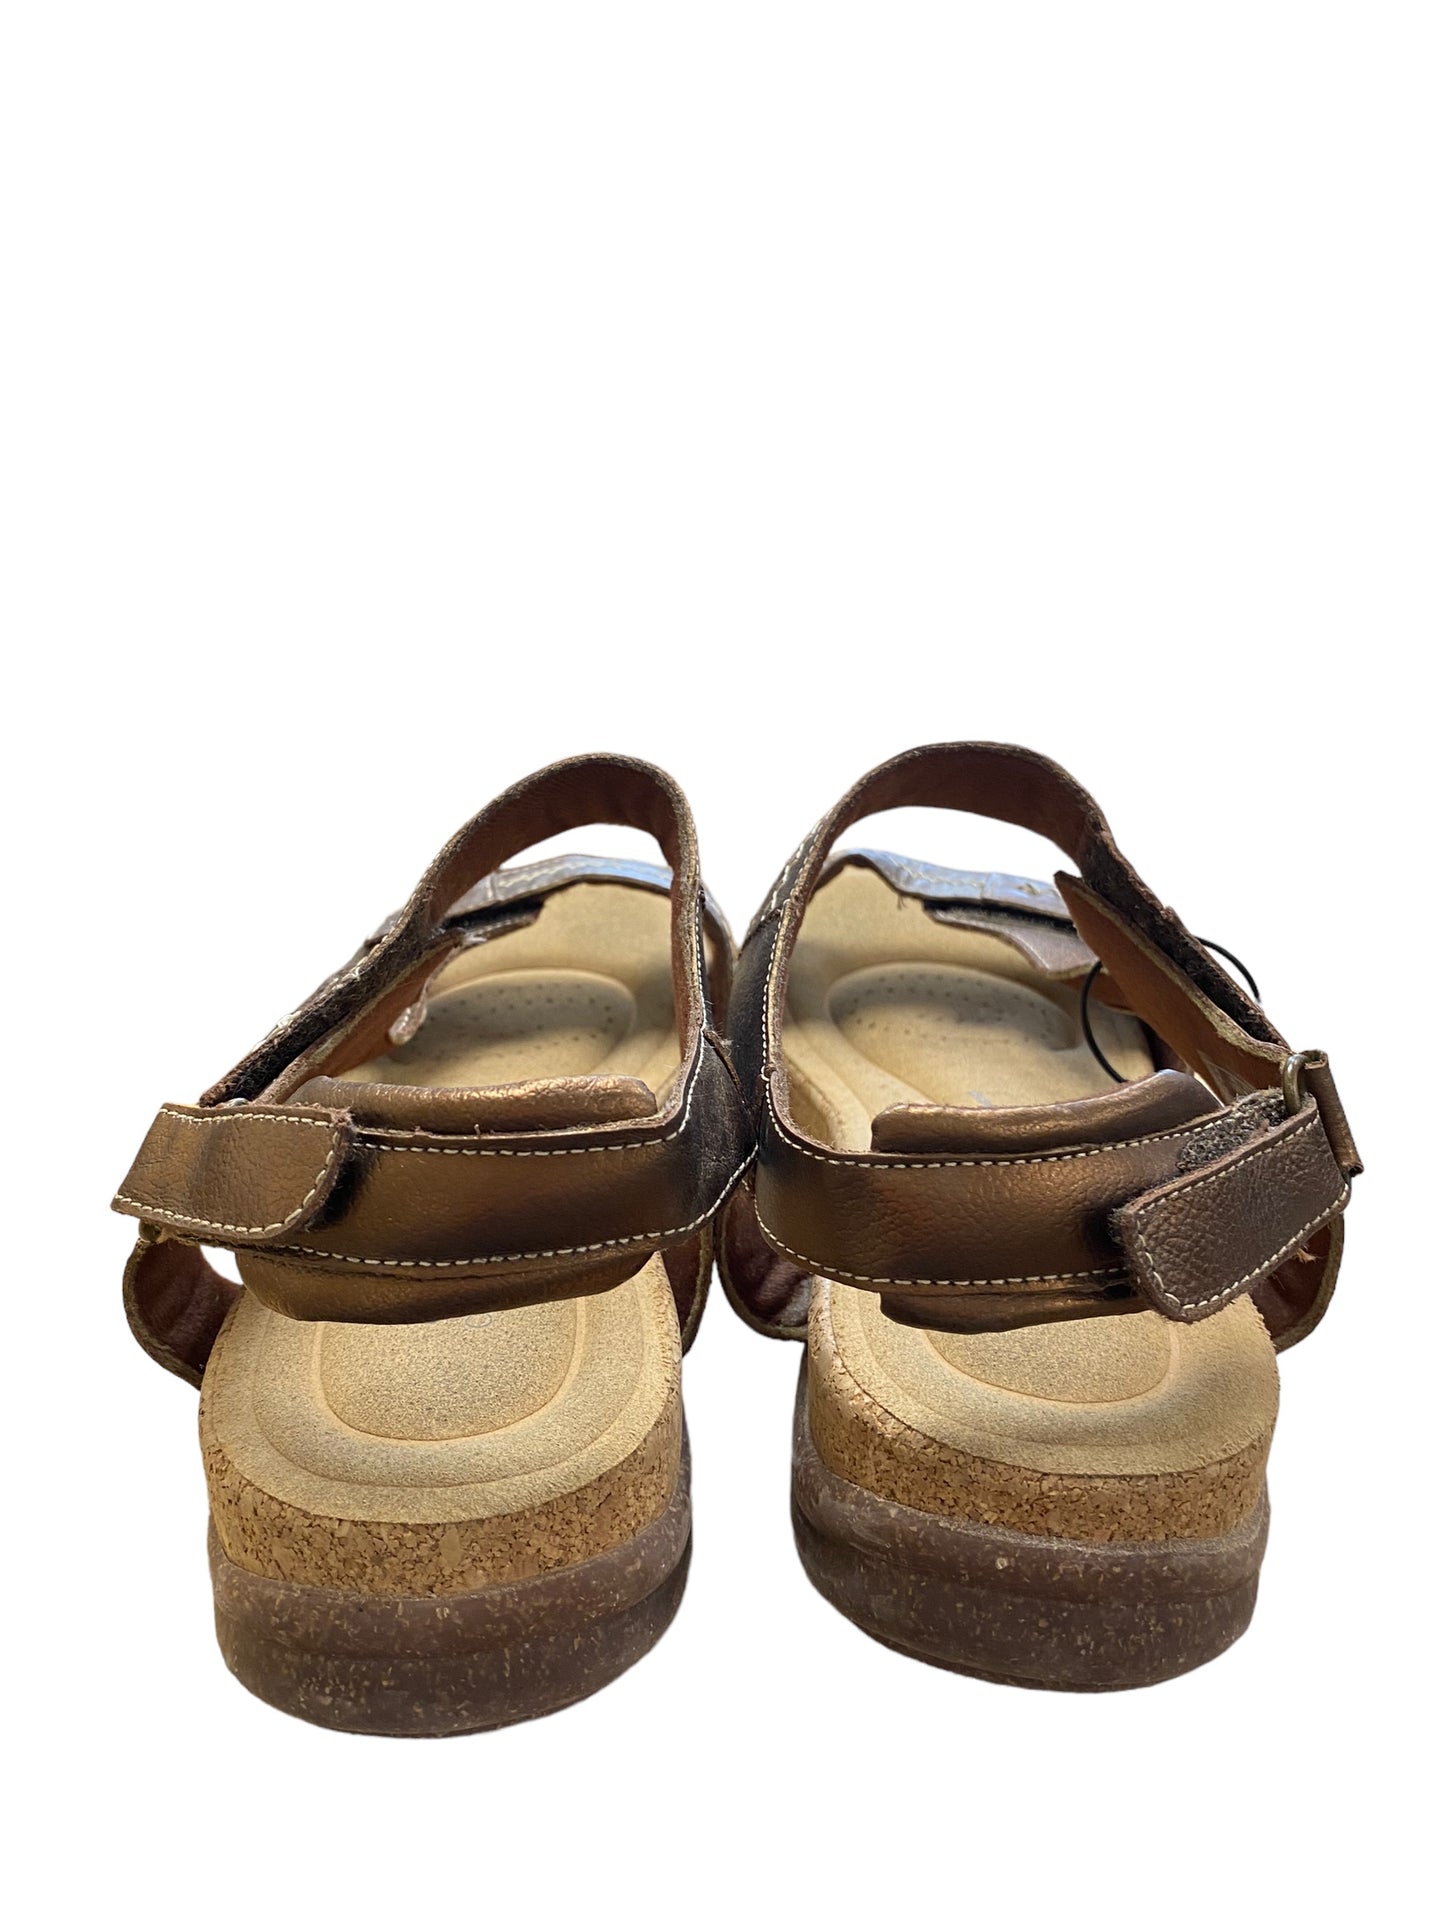 Sandals Flats By Clarks  Size: 10.5